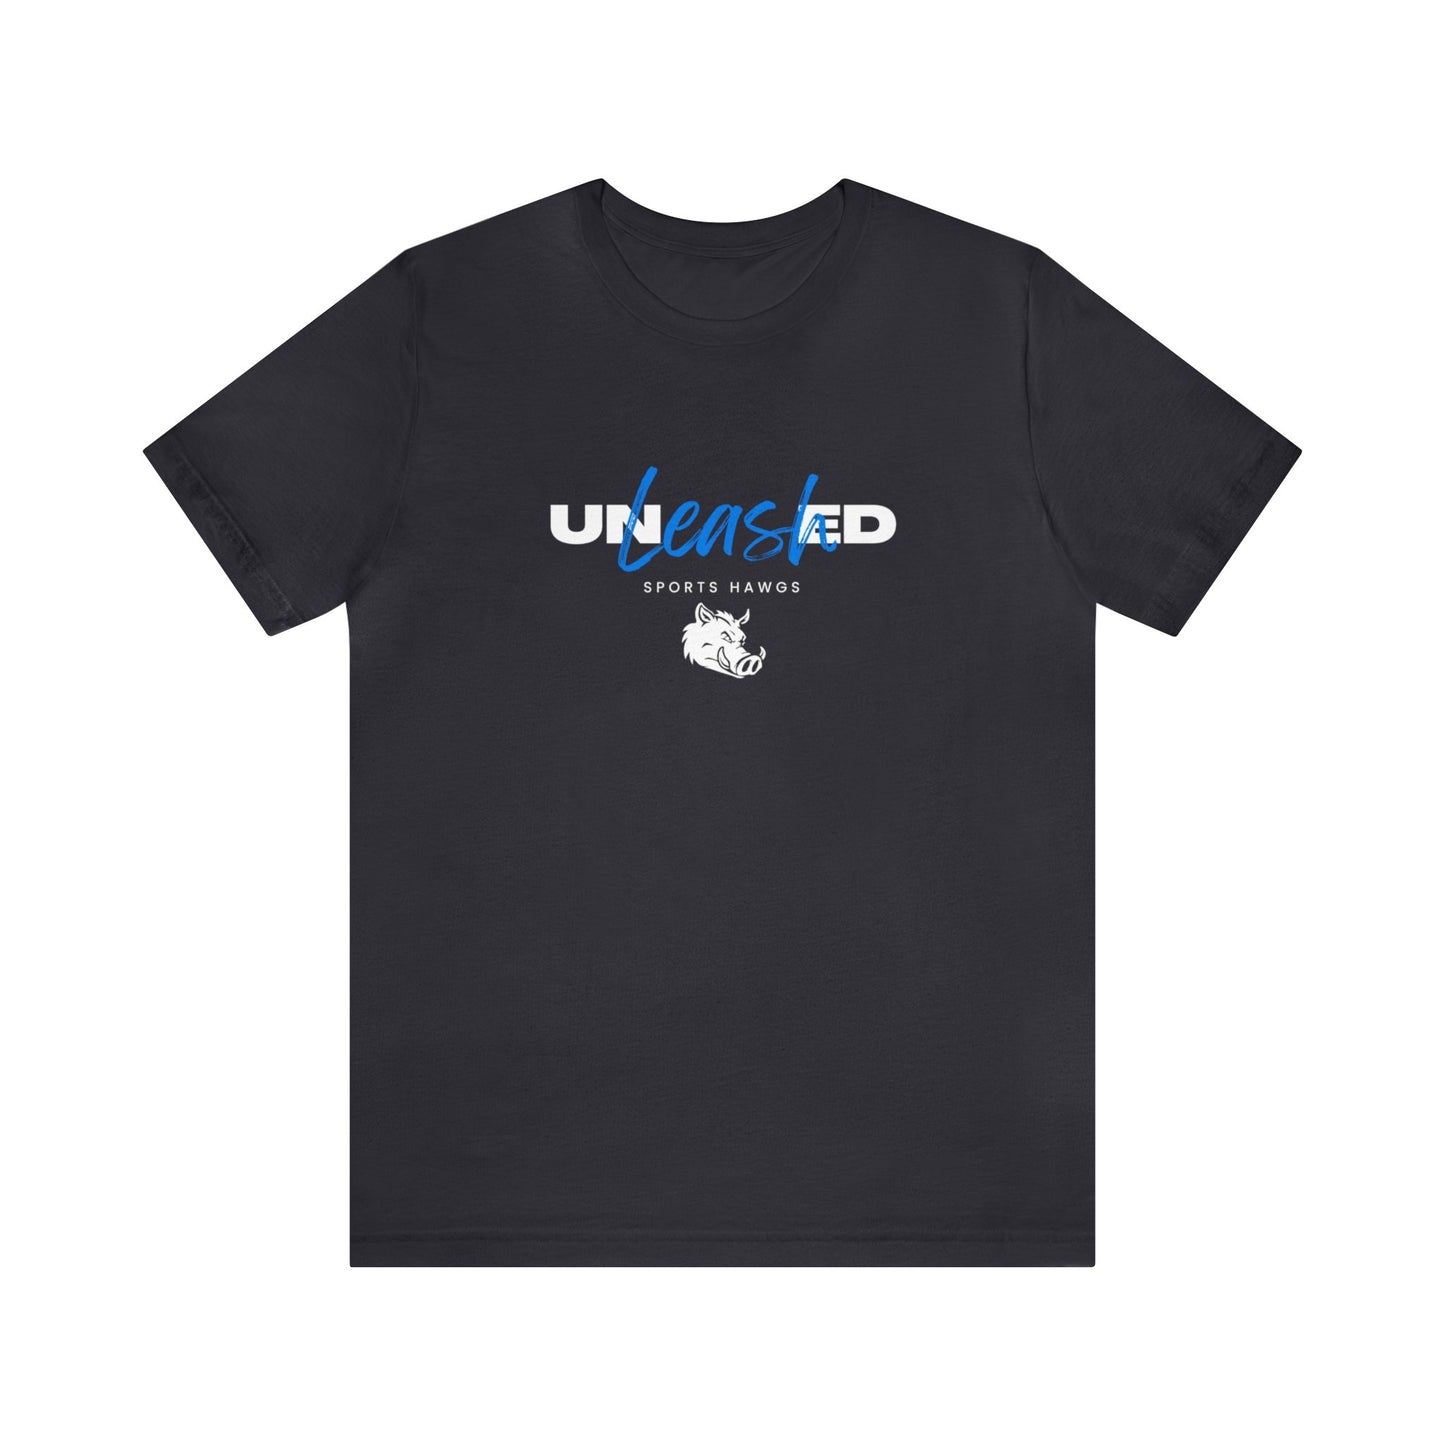 Unleashed T-shirt Event